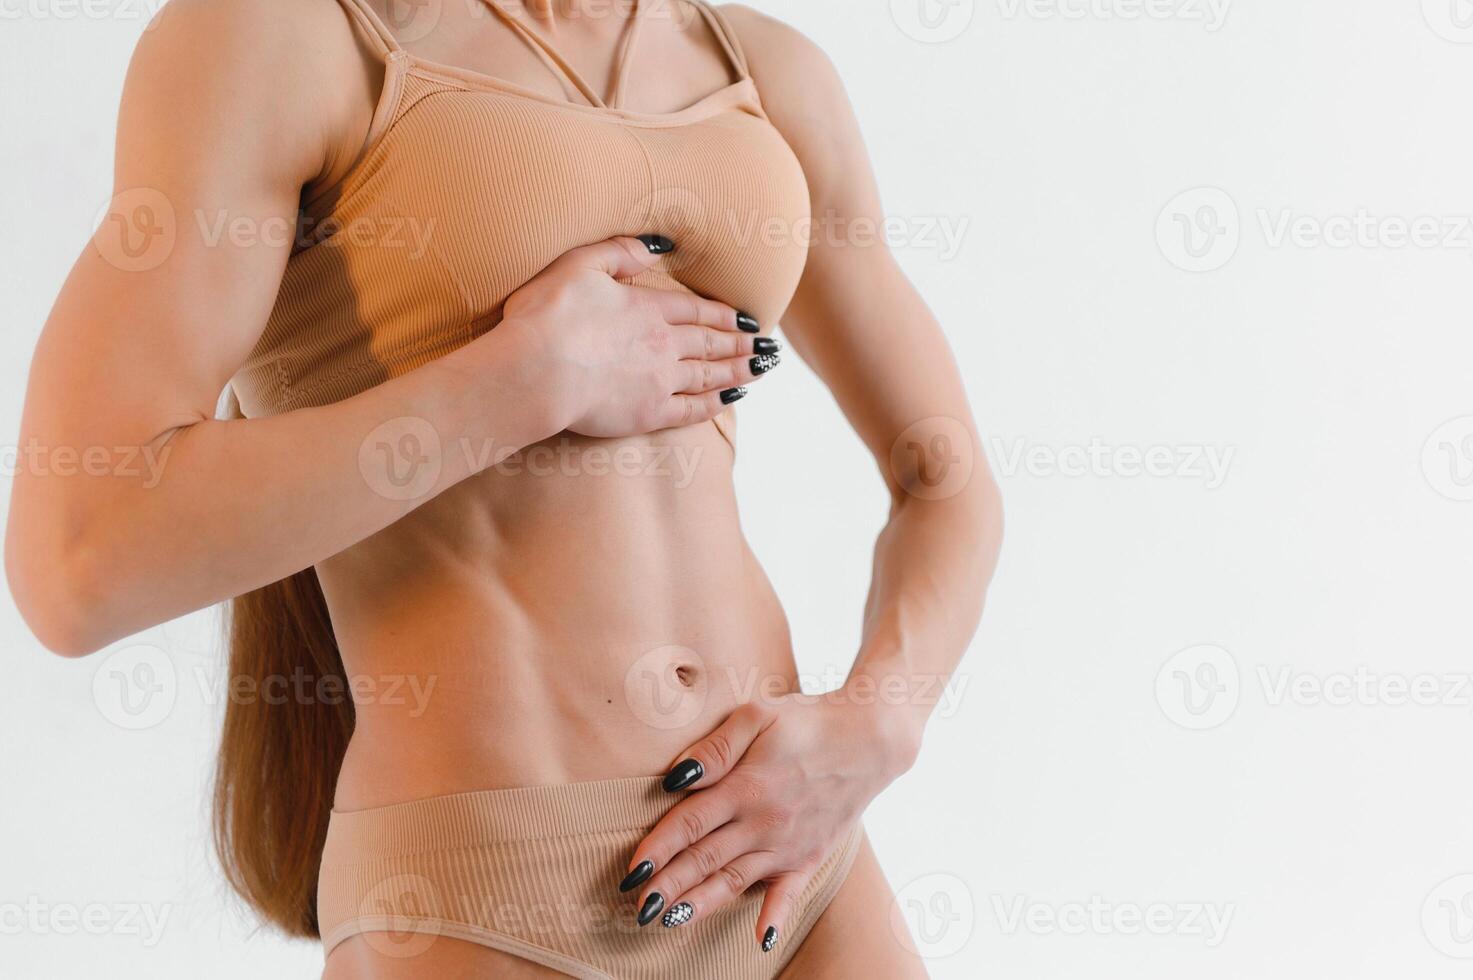 close up picture of woman trained abs photo